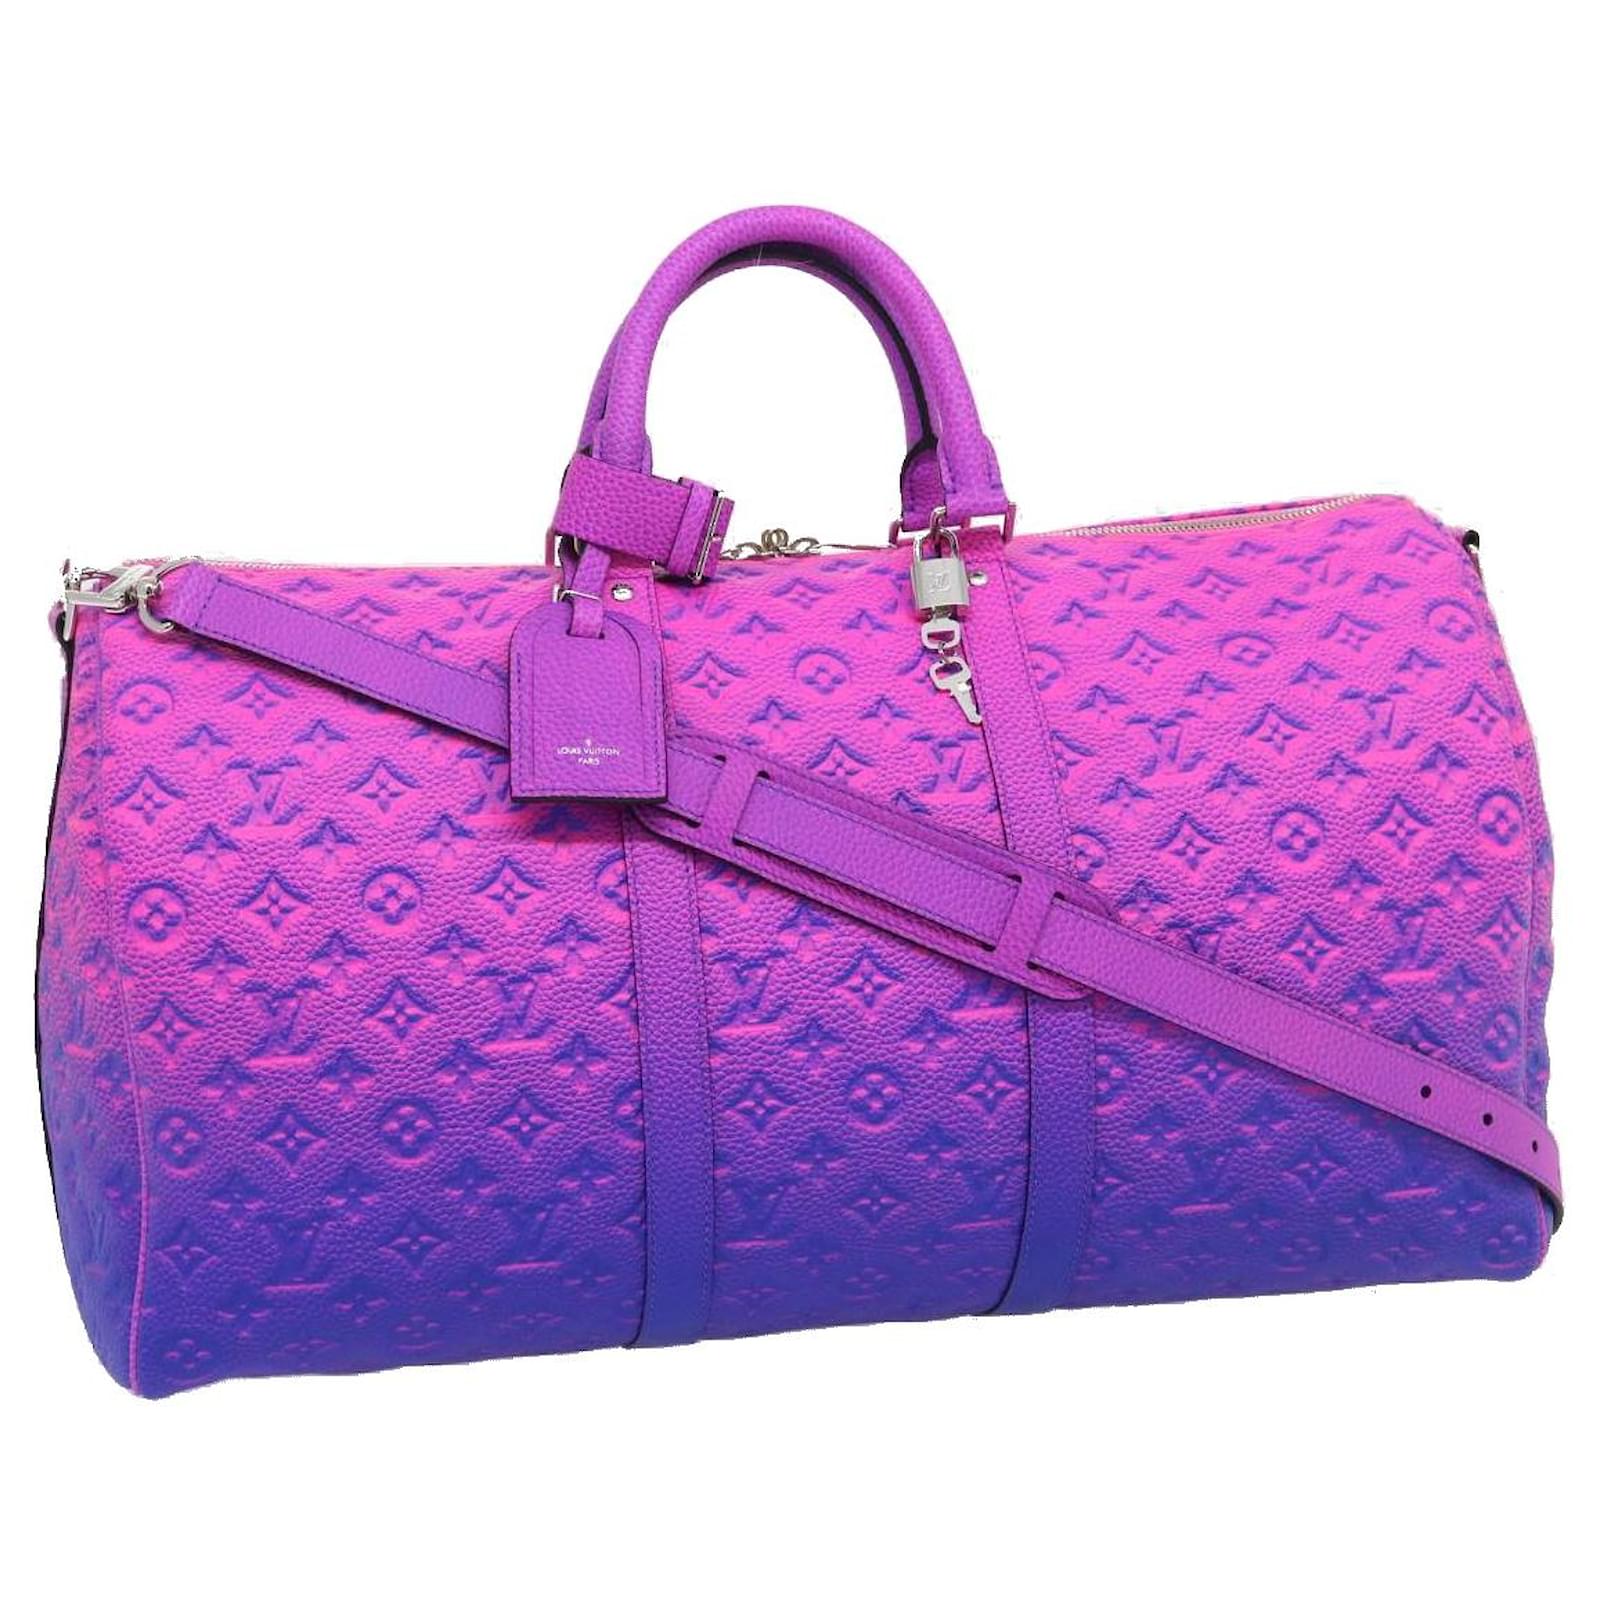 Louis Vuitton's Taurillon Monogram collection is the colourful